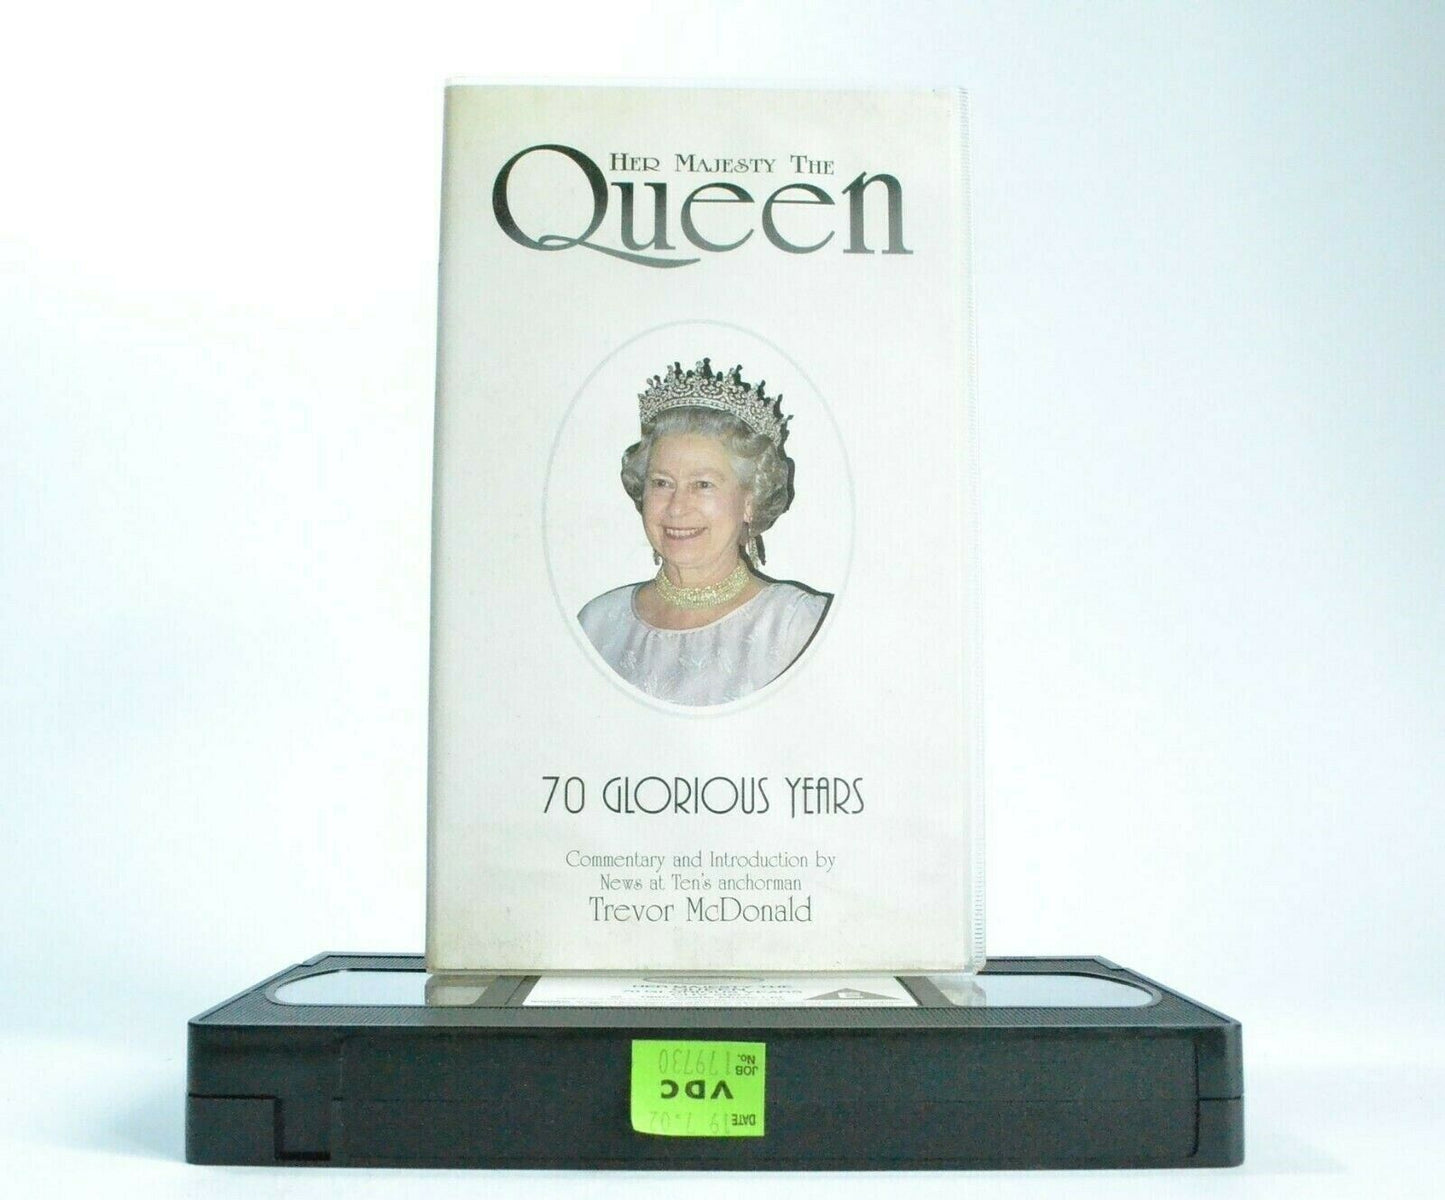 Her Majesty The Queen: 70 Glorious Years - Documentary - Trevor McDonald - VHS-